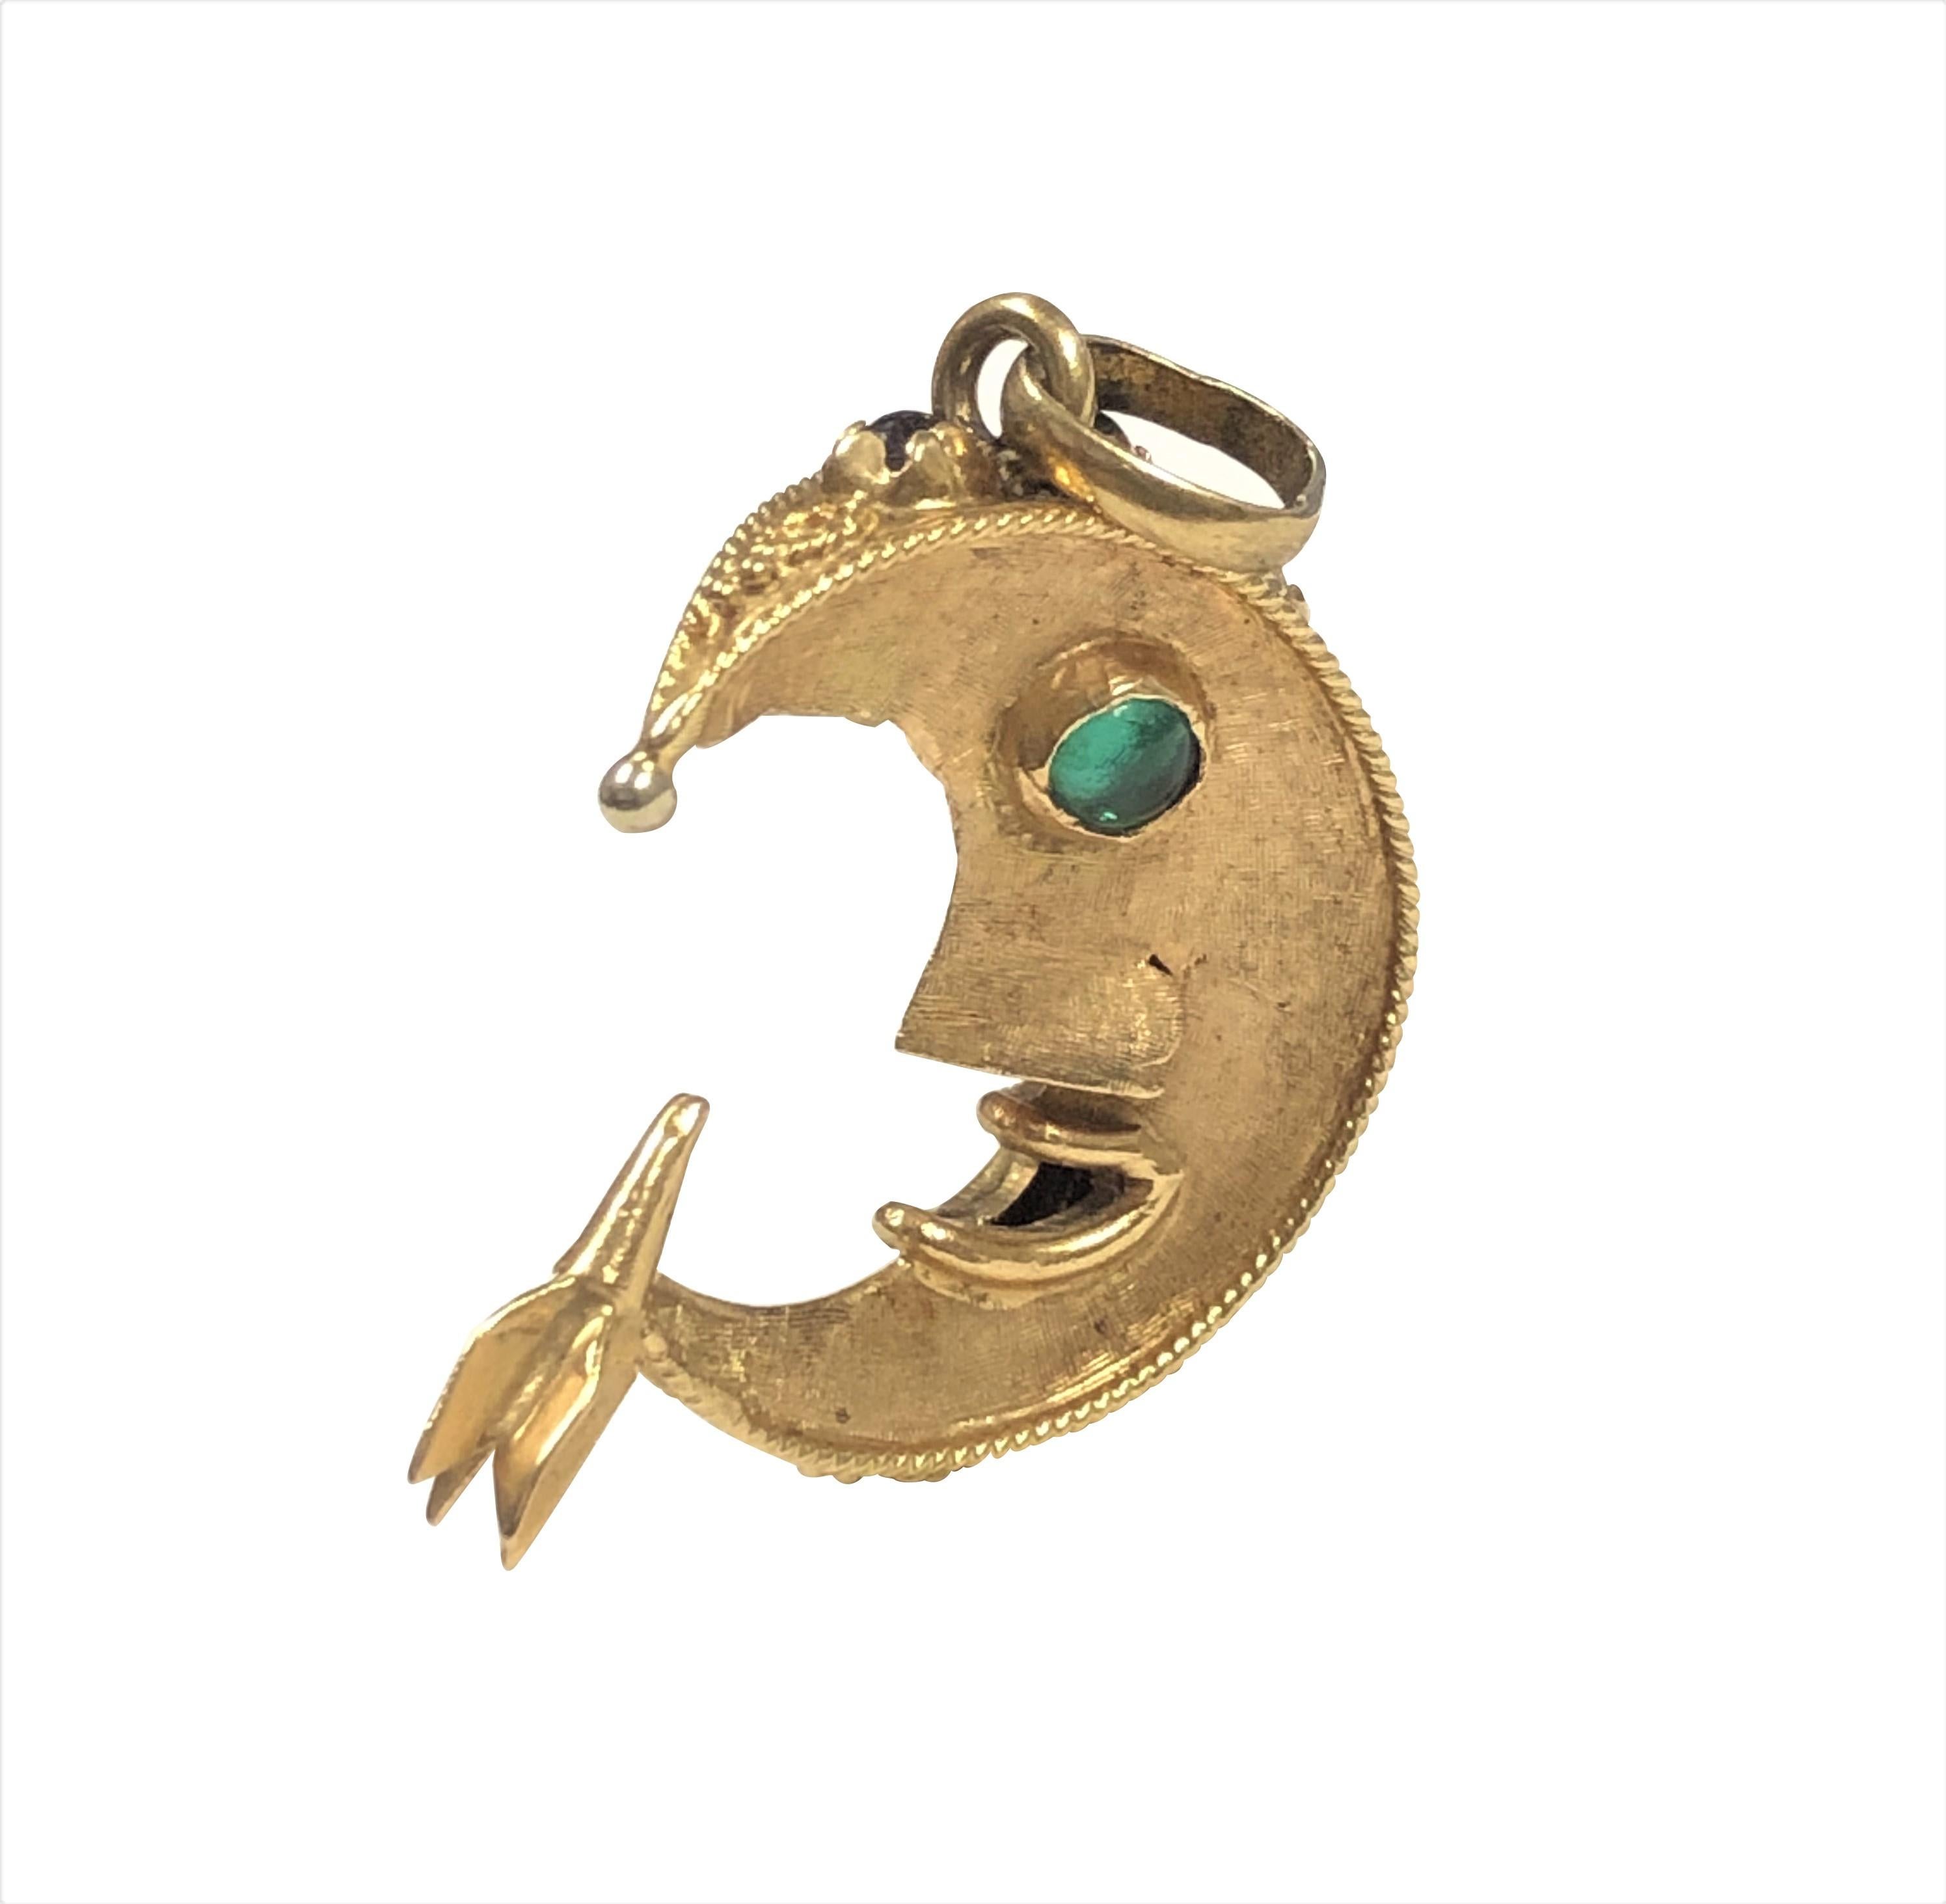 Circa 1970 18K yellow Gold Man in the Moon Charm , measuring 1 X 1 Inch X 3/8 inch thick and weighing 7.5 Grams, the 2 sided charm is lightly textured, nicely detailed featuring a Rocket Ship Landing at the tail of the Moon. Set with Red and Green